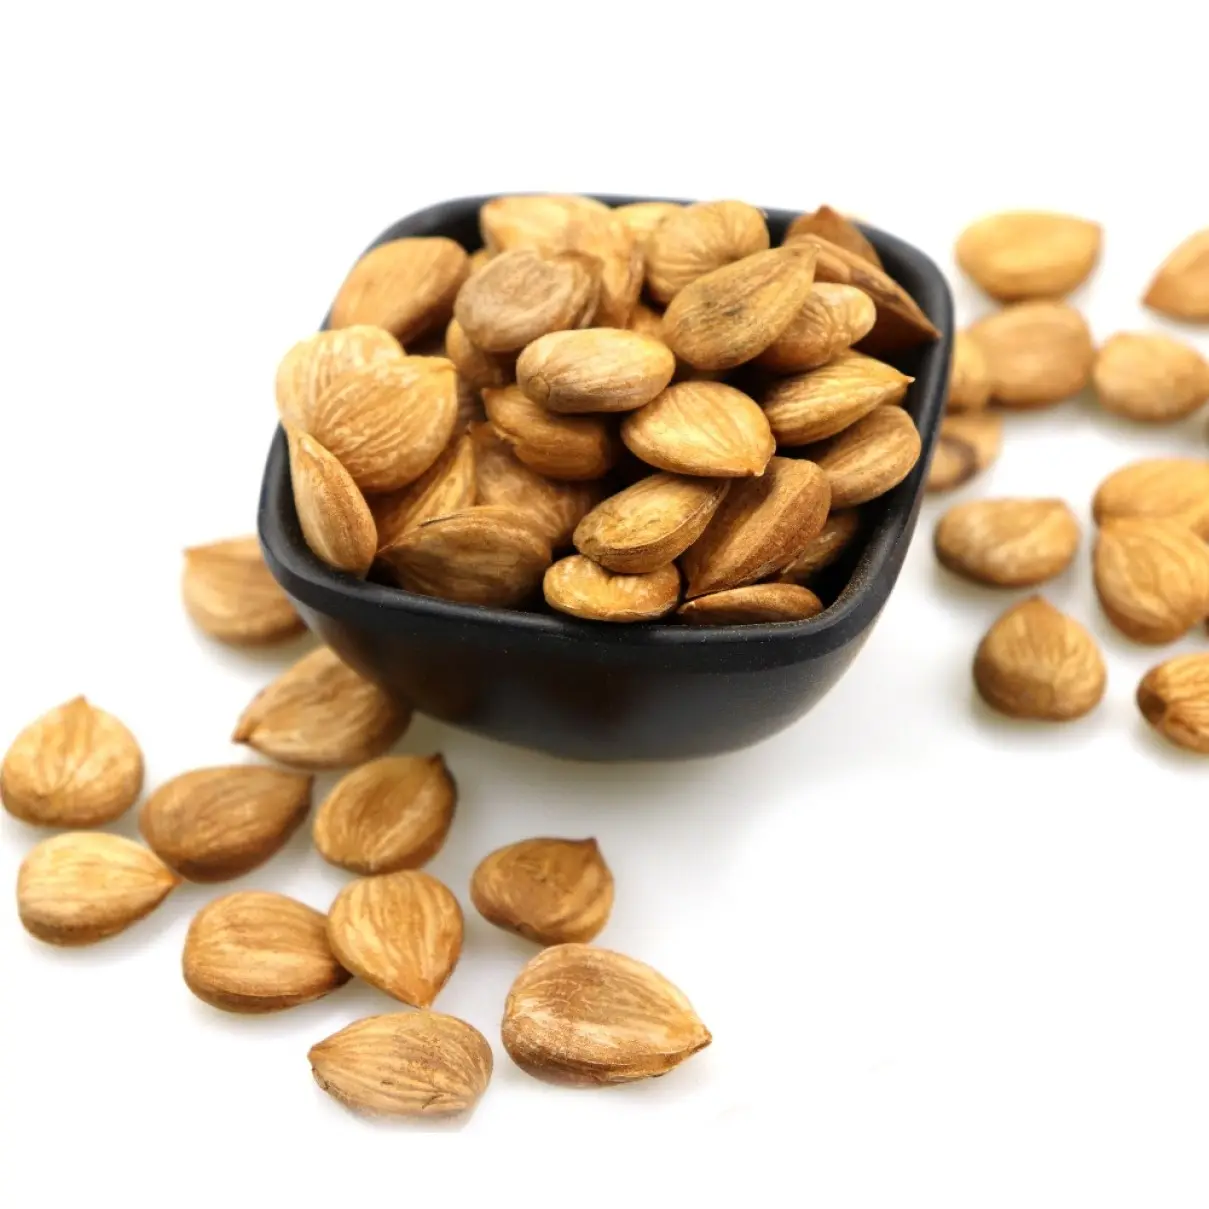 California Bulk Natural Sweet Salty Almond Nuts In Shell for sale at discounted price